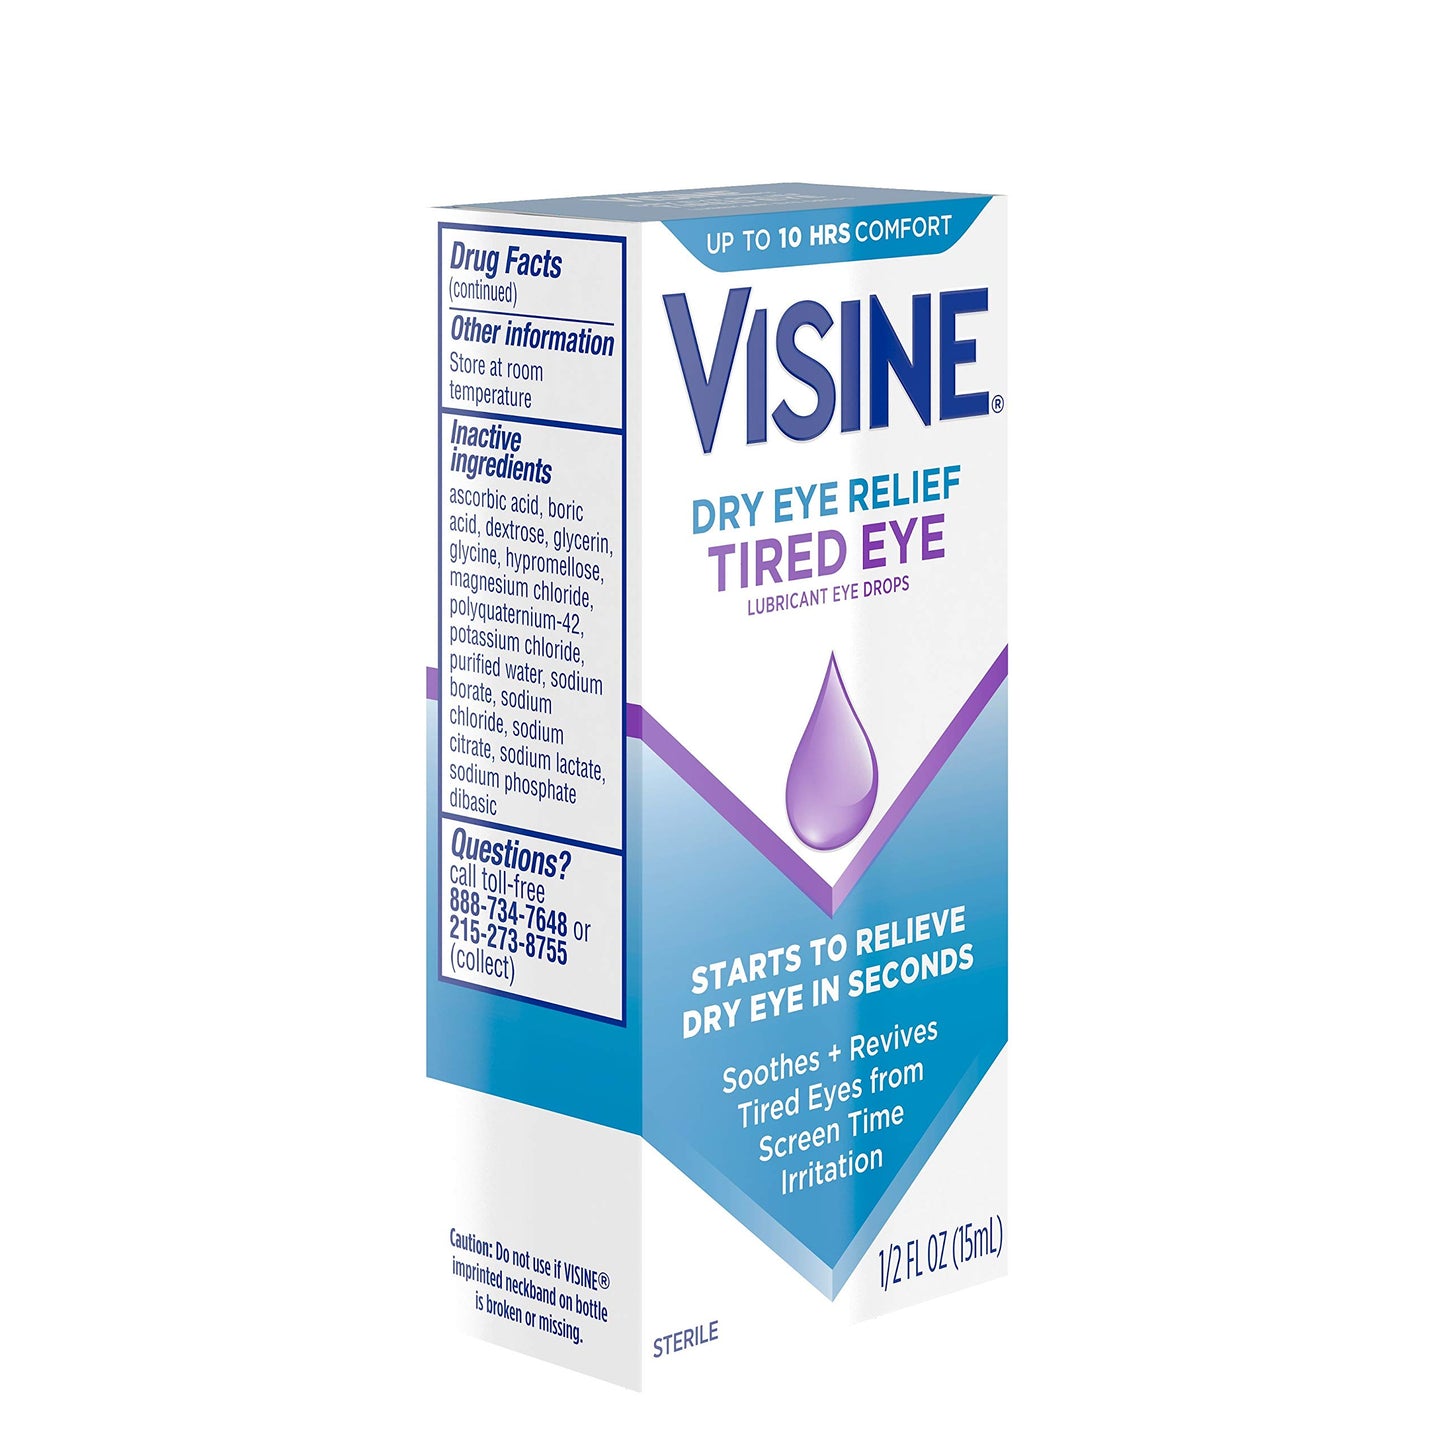 Visine Dry Eye Relief Tired Eye Lubricant Eye Drops, Moisturizing & Soothing Sterile Drops for Irritated, Dry & Tired Eyes Due to Screen Time Irritation, Polyethylene Glycol, 0.5 fl. oz